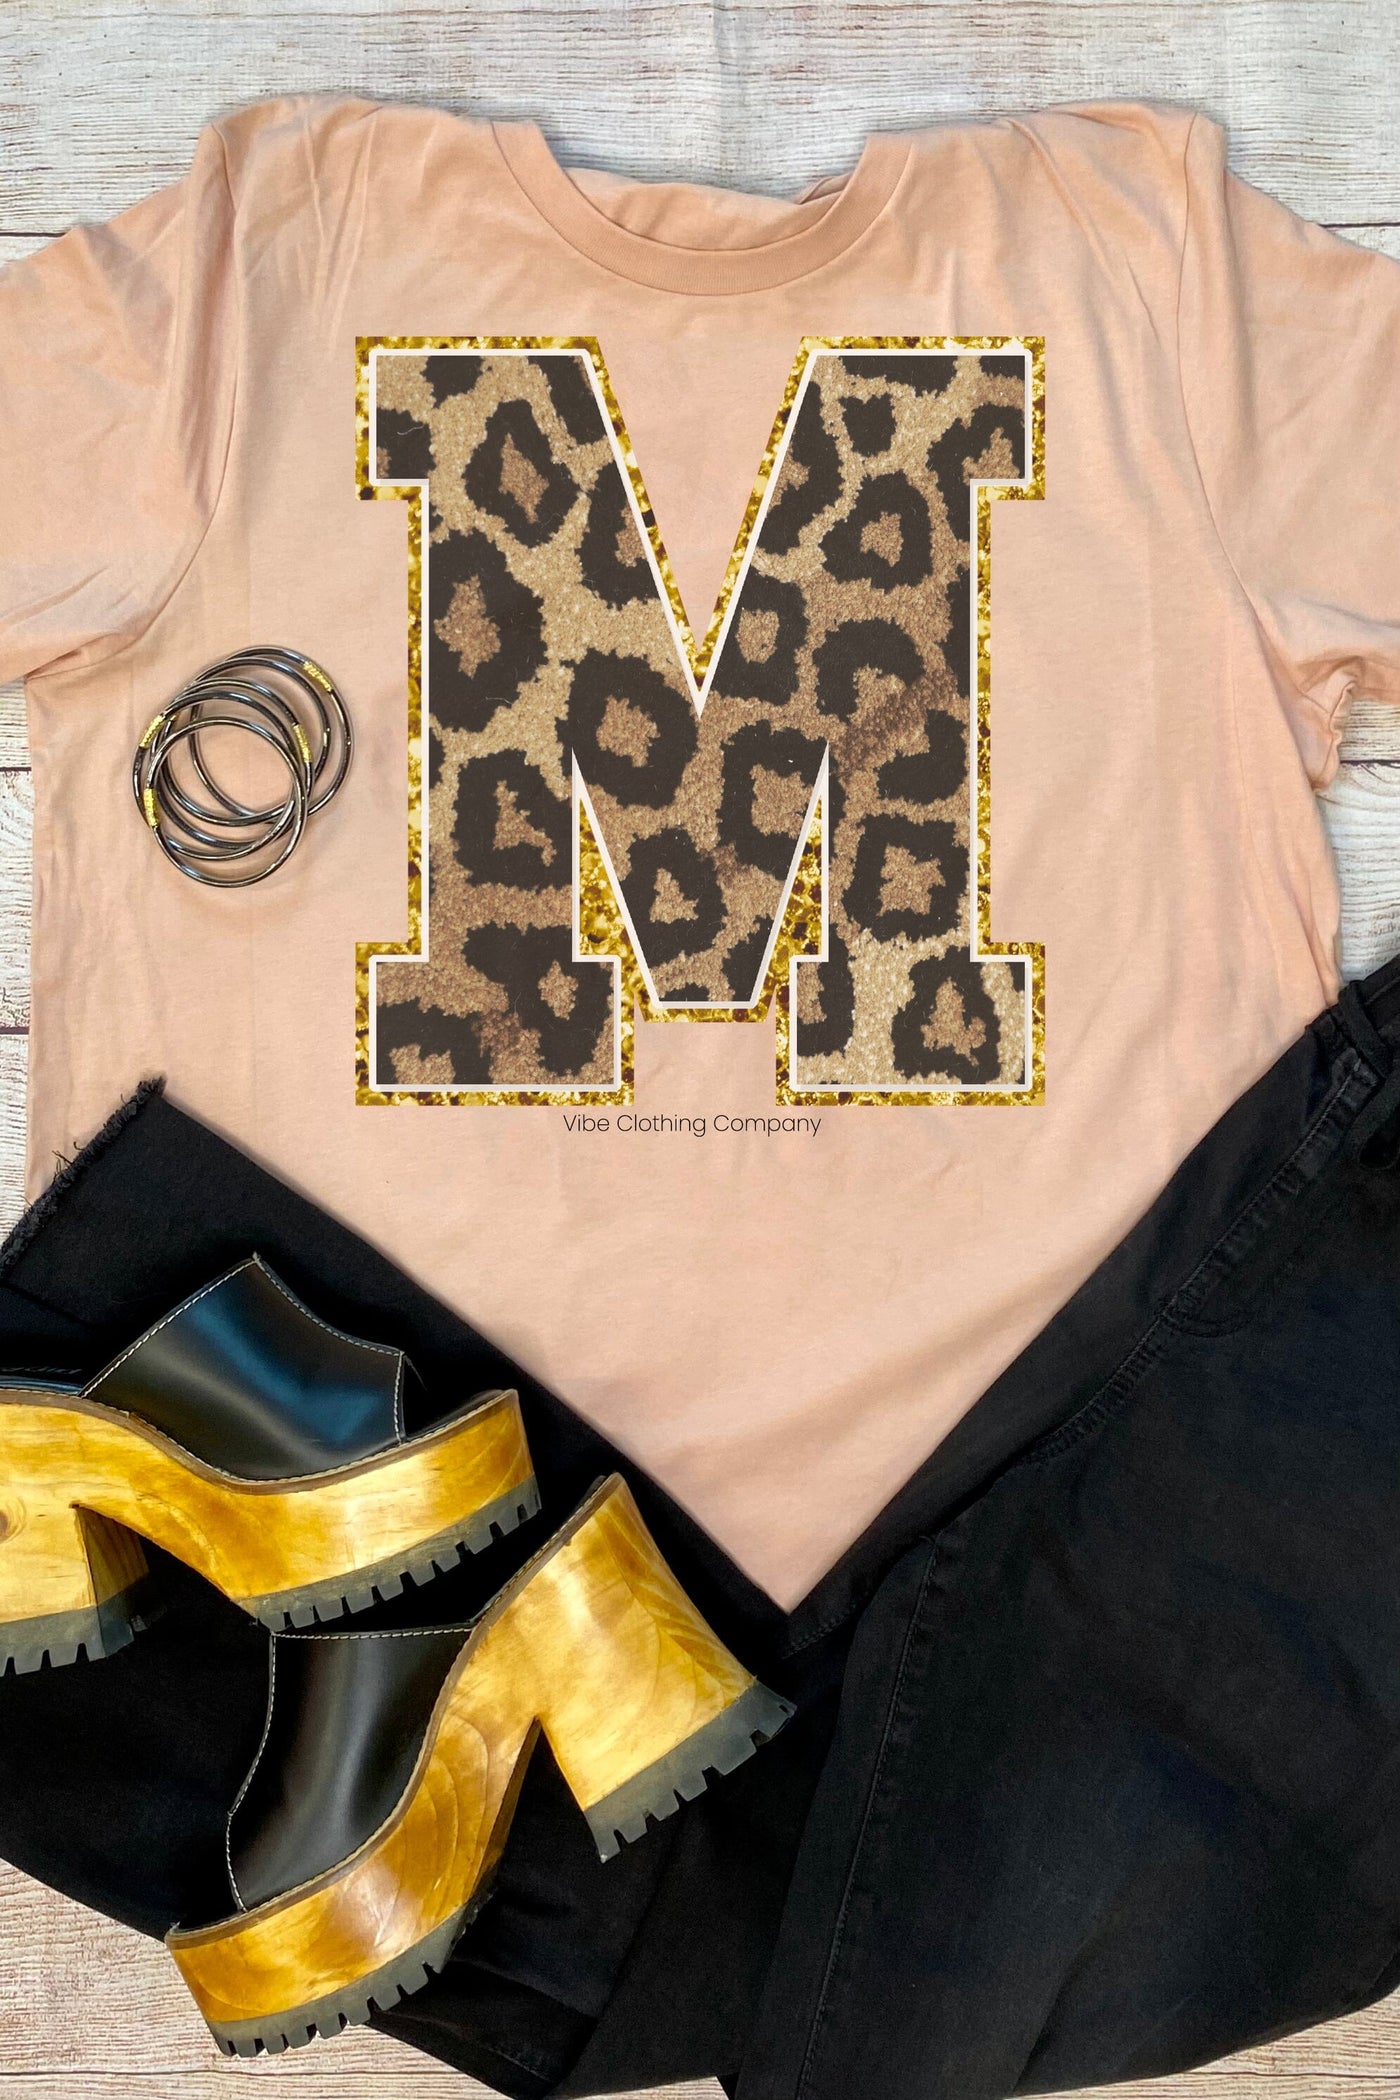 Initials A-M: Blush Graphic Tee graphic tees VCC Small M 